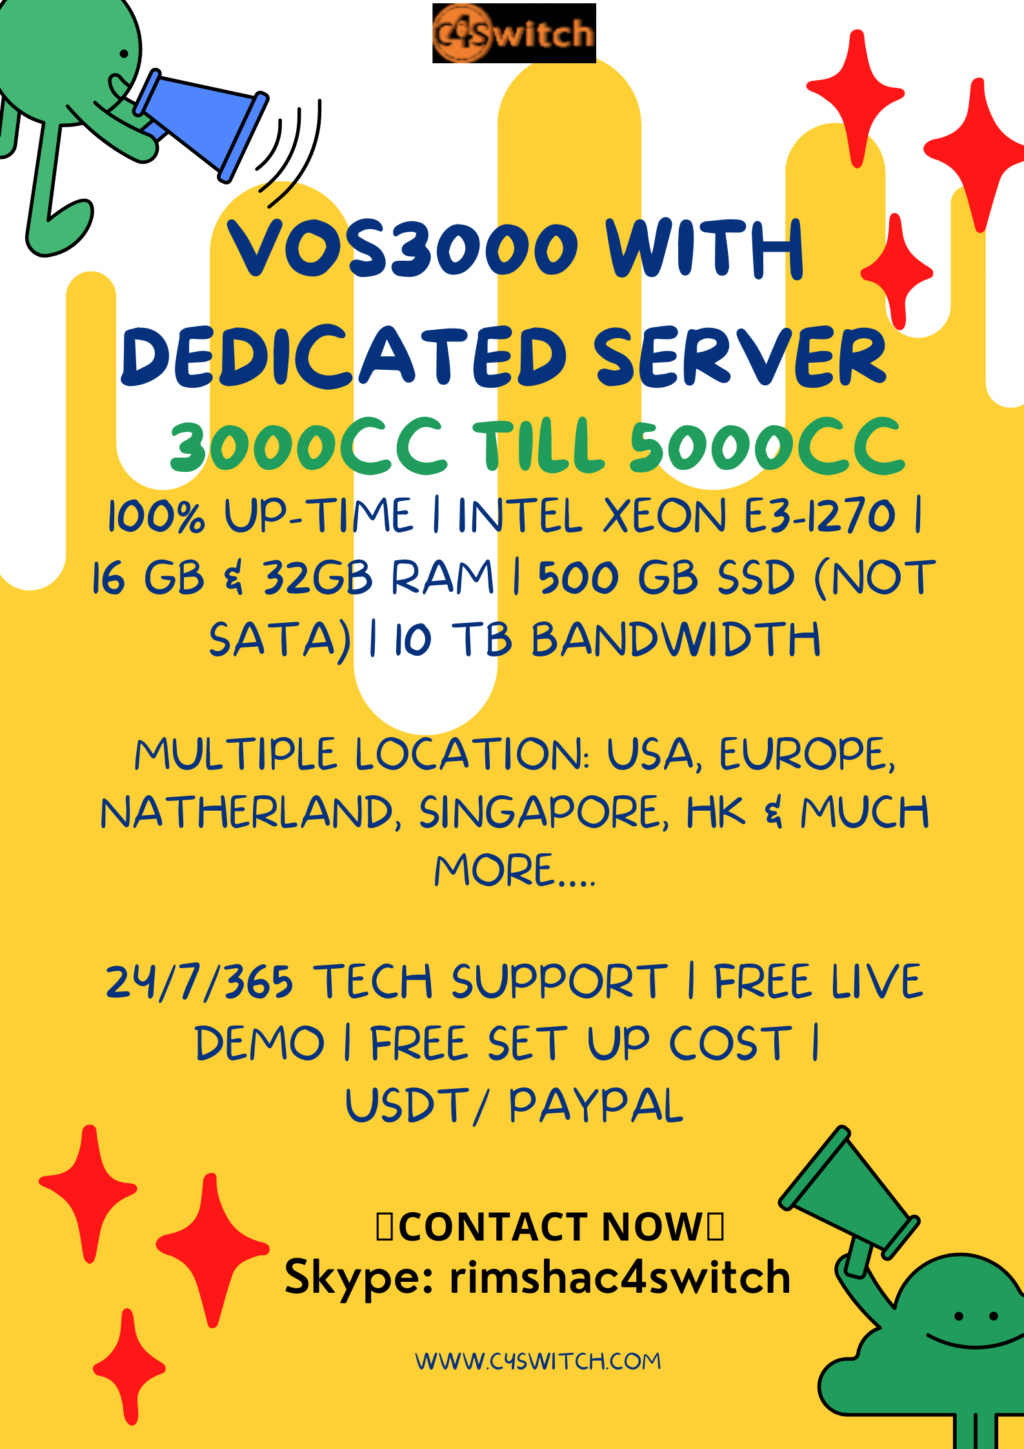 VOS3000 with DEDICATED SERVERS & MULTIPLE CO LOCATIONS.. Vos30013